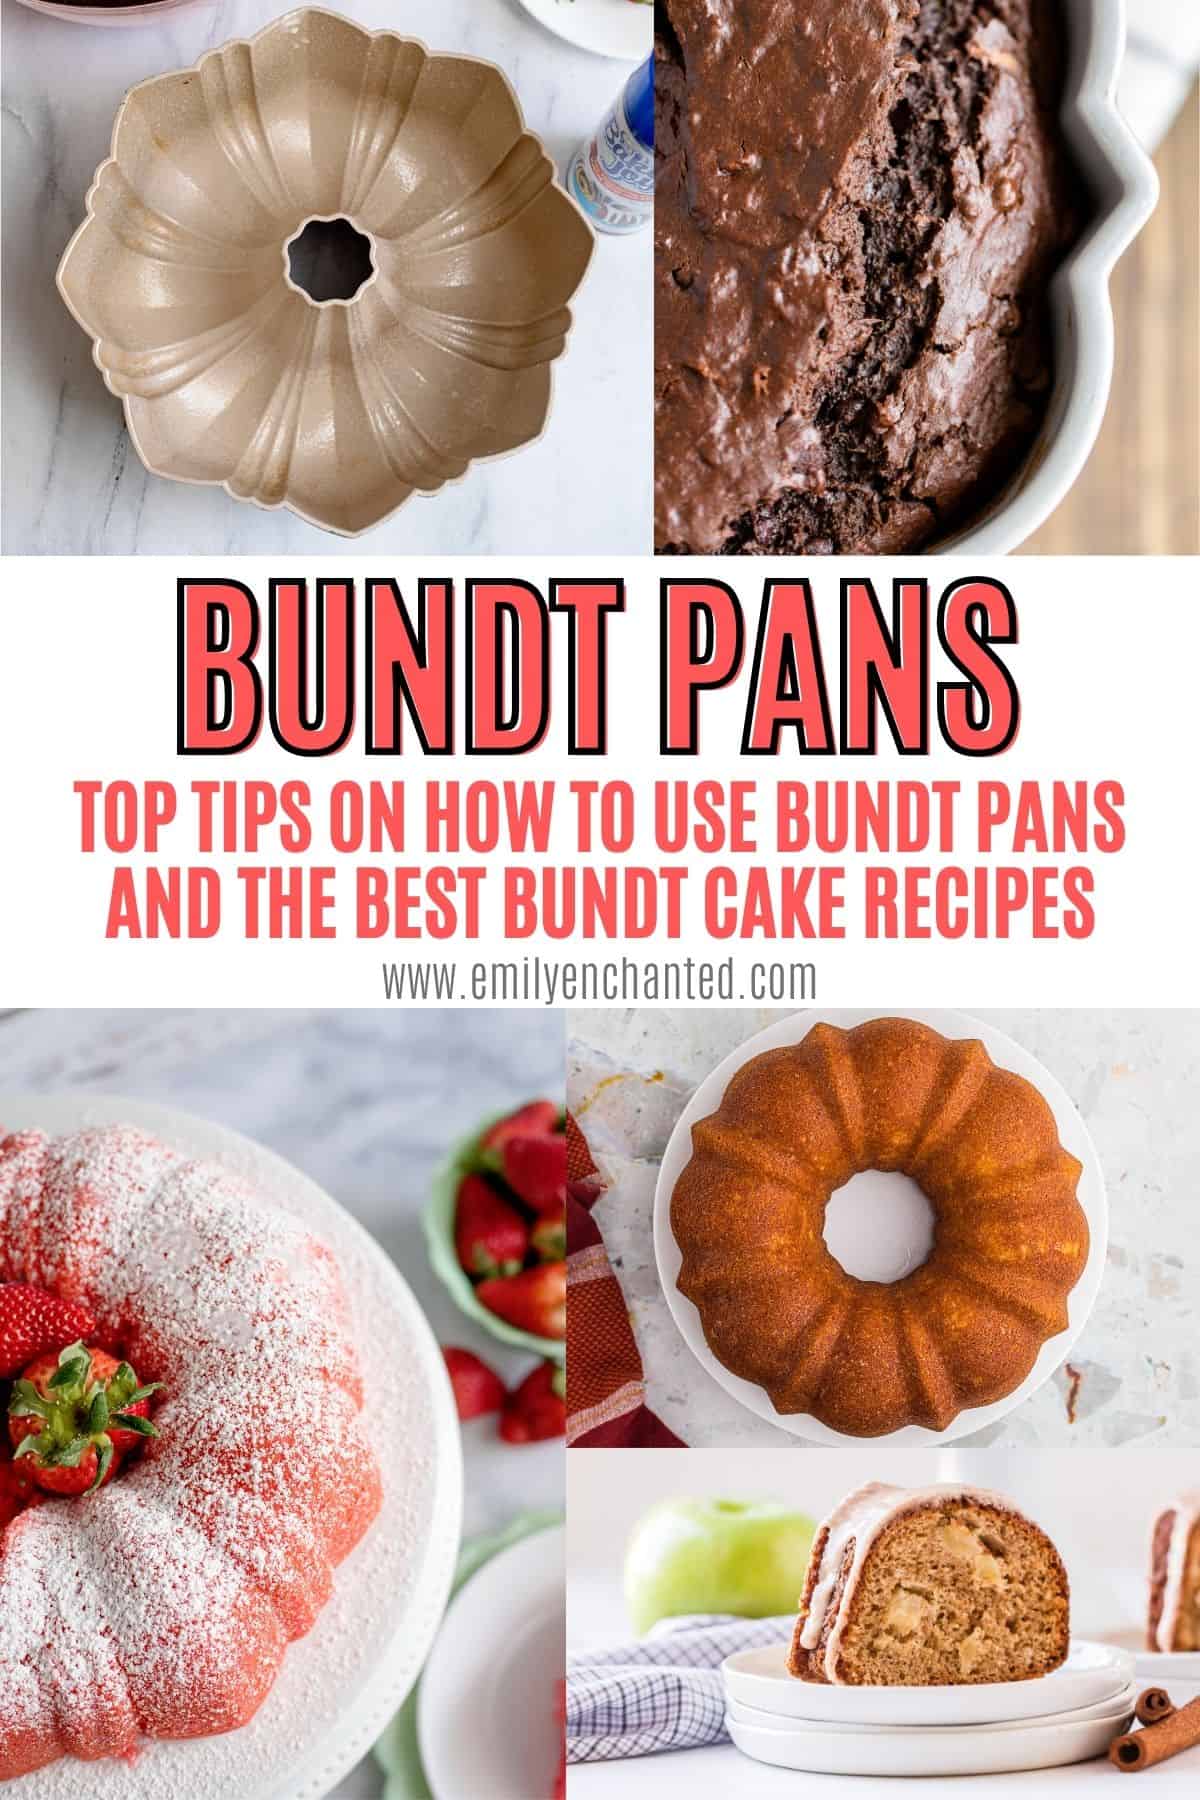 Top Tips On How To Use A Bundt Pan + Best Bundt Cake Recipes